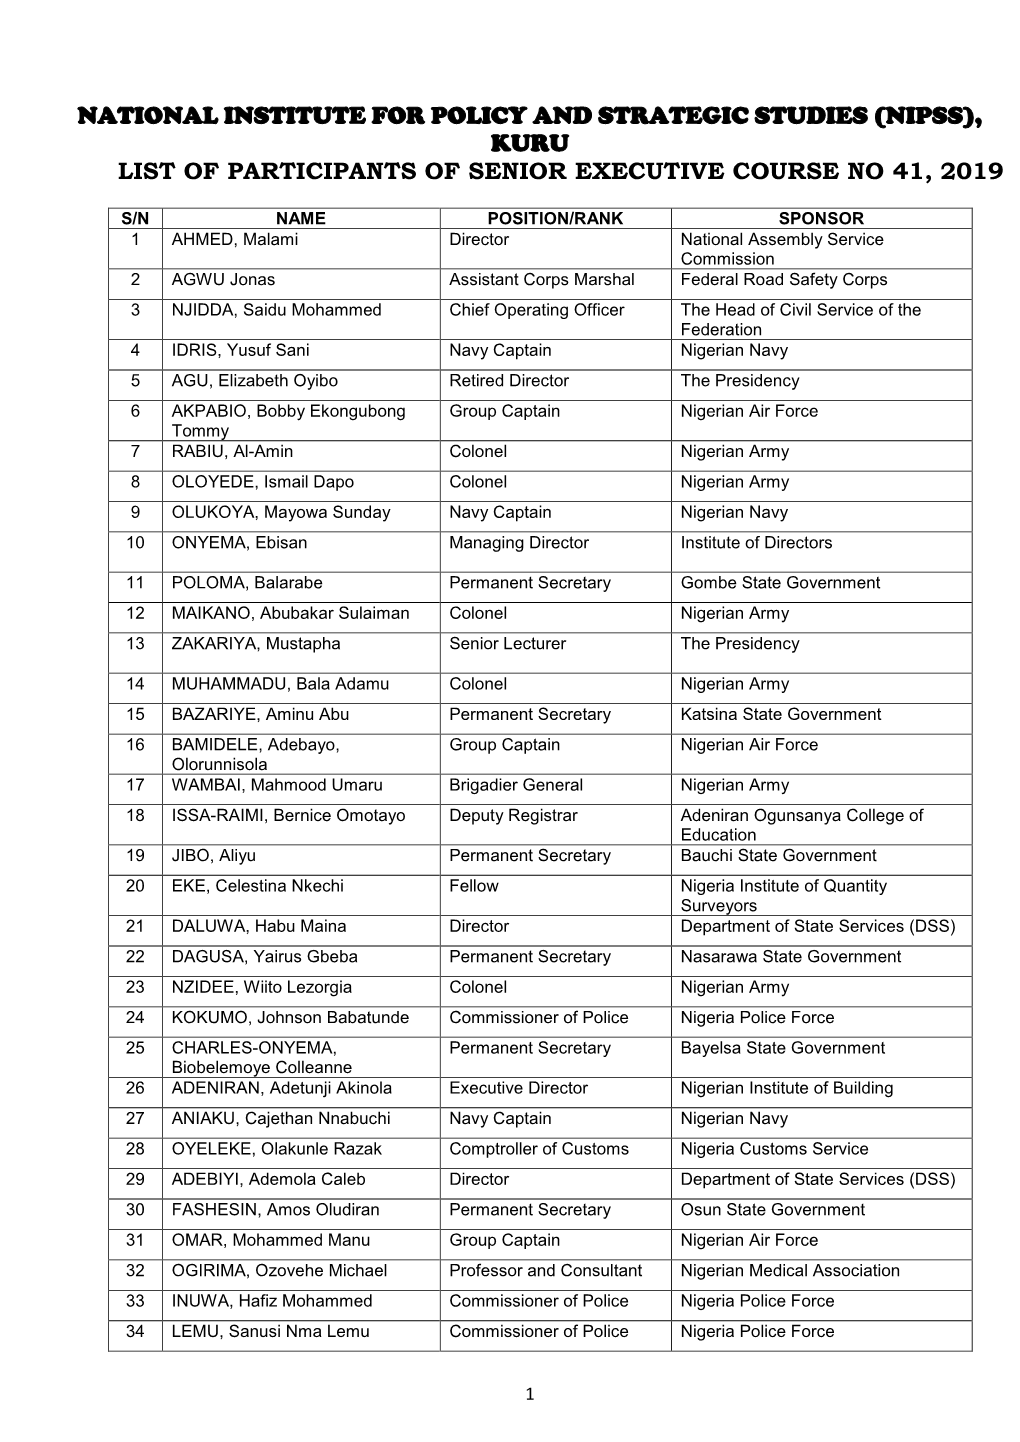 National Institute for Policy and Strategic Studies (Nipss), Kuru List of Participants of Senior Executive Course No 41, 2019